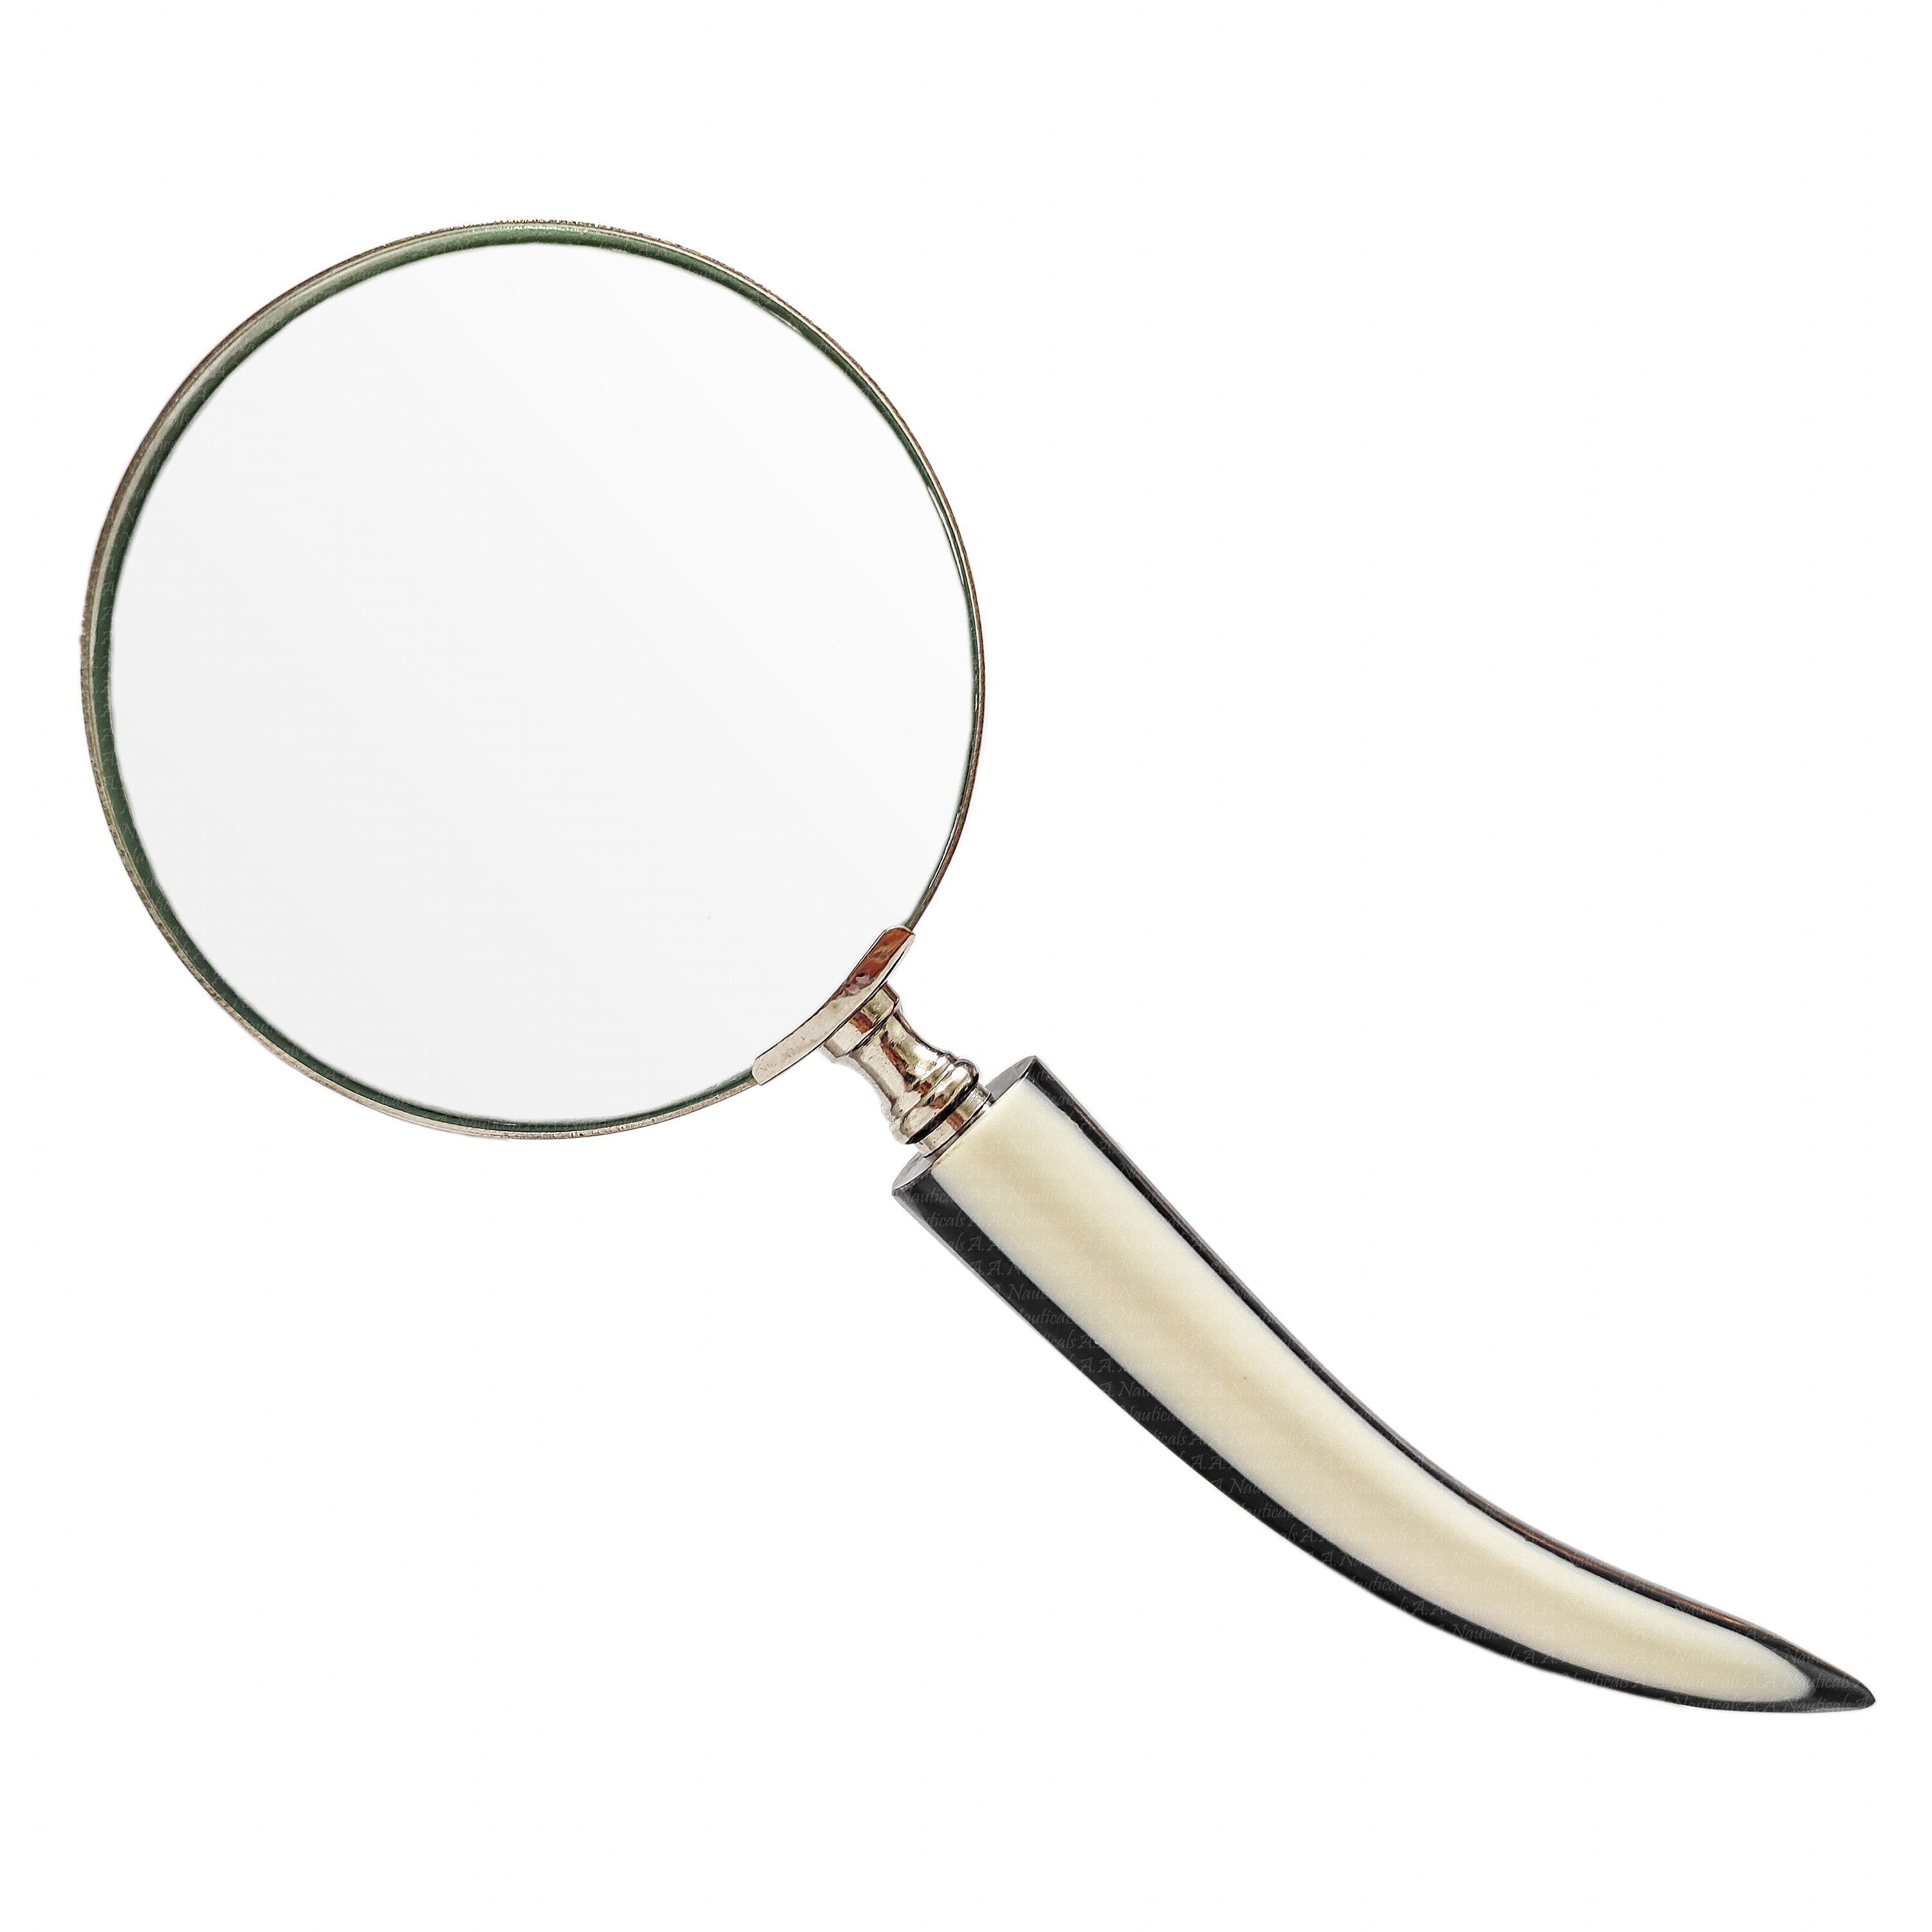 Large Magnifying Glass With a Spiral Twist Handle & Sterling Silver Rim 